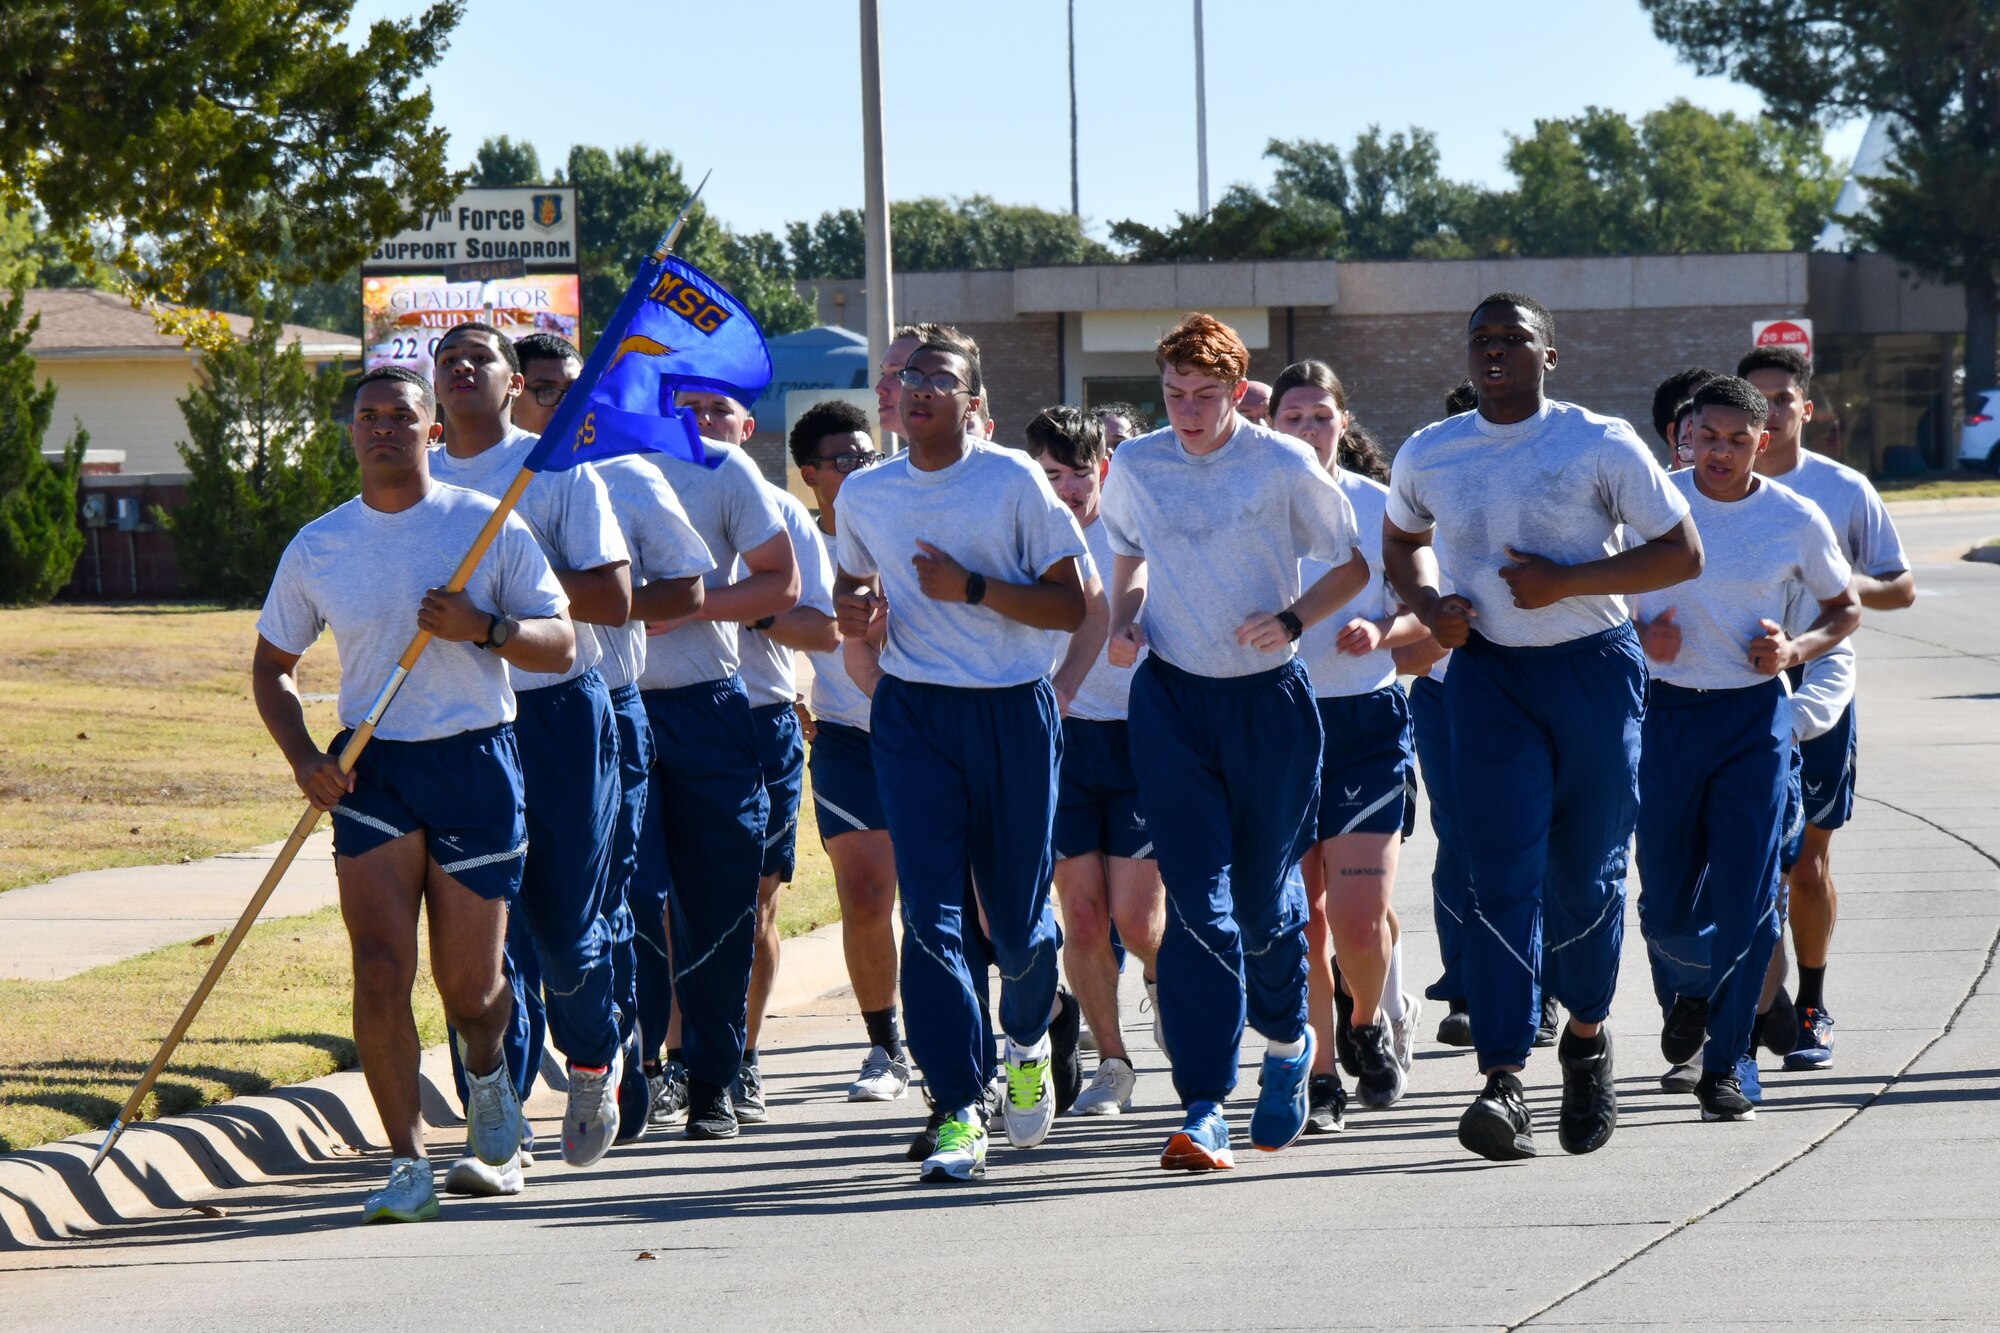 Airmen from the 97th Security Forces Squadron, as well as service members from across the base, finish their 4.5 mile run at Altus Air Force Base (AAFB), Oklahoma Oct. 20, 2022. Prior to starting their run, The Standard team was given a brief slideshow and speech from Melissa Simms, the AAFB historian about the history of Security Forces on AAFB. (U.S. Air Force photo by Airman 1st Class Kari Degraffenreed)